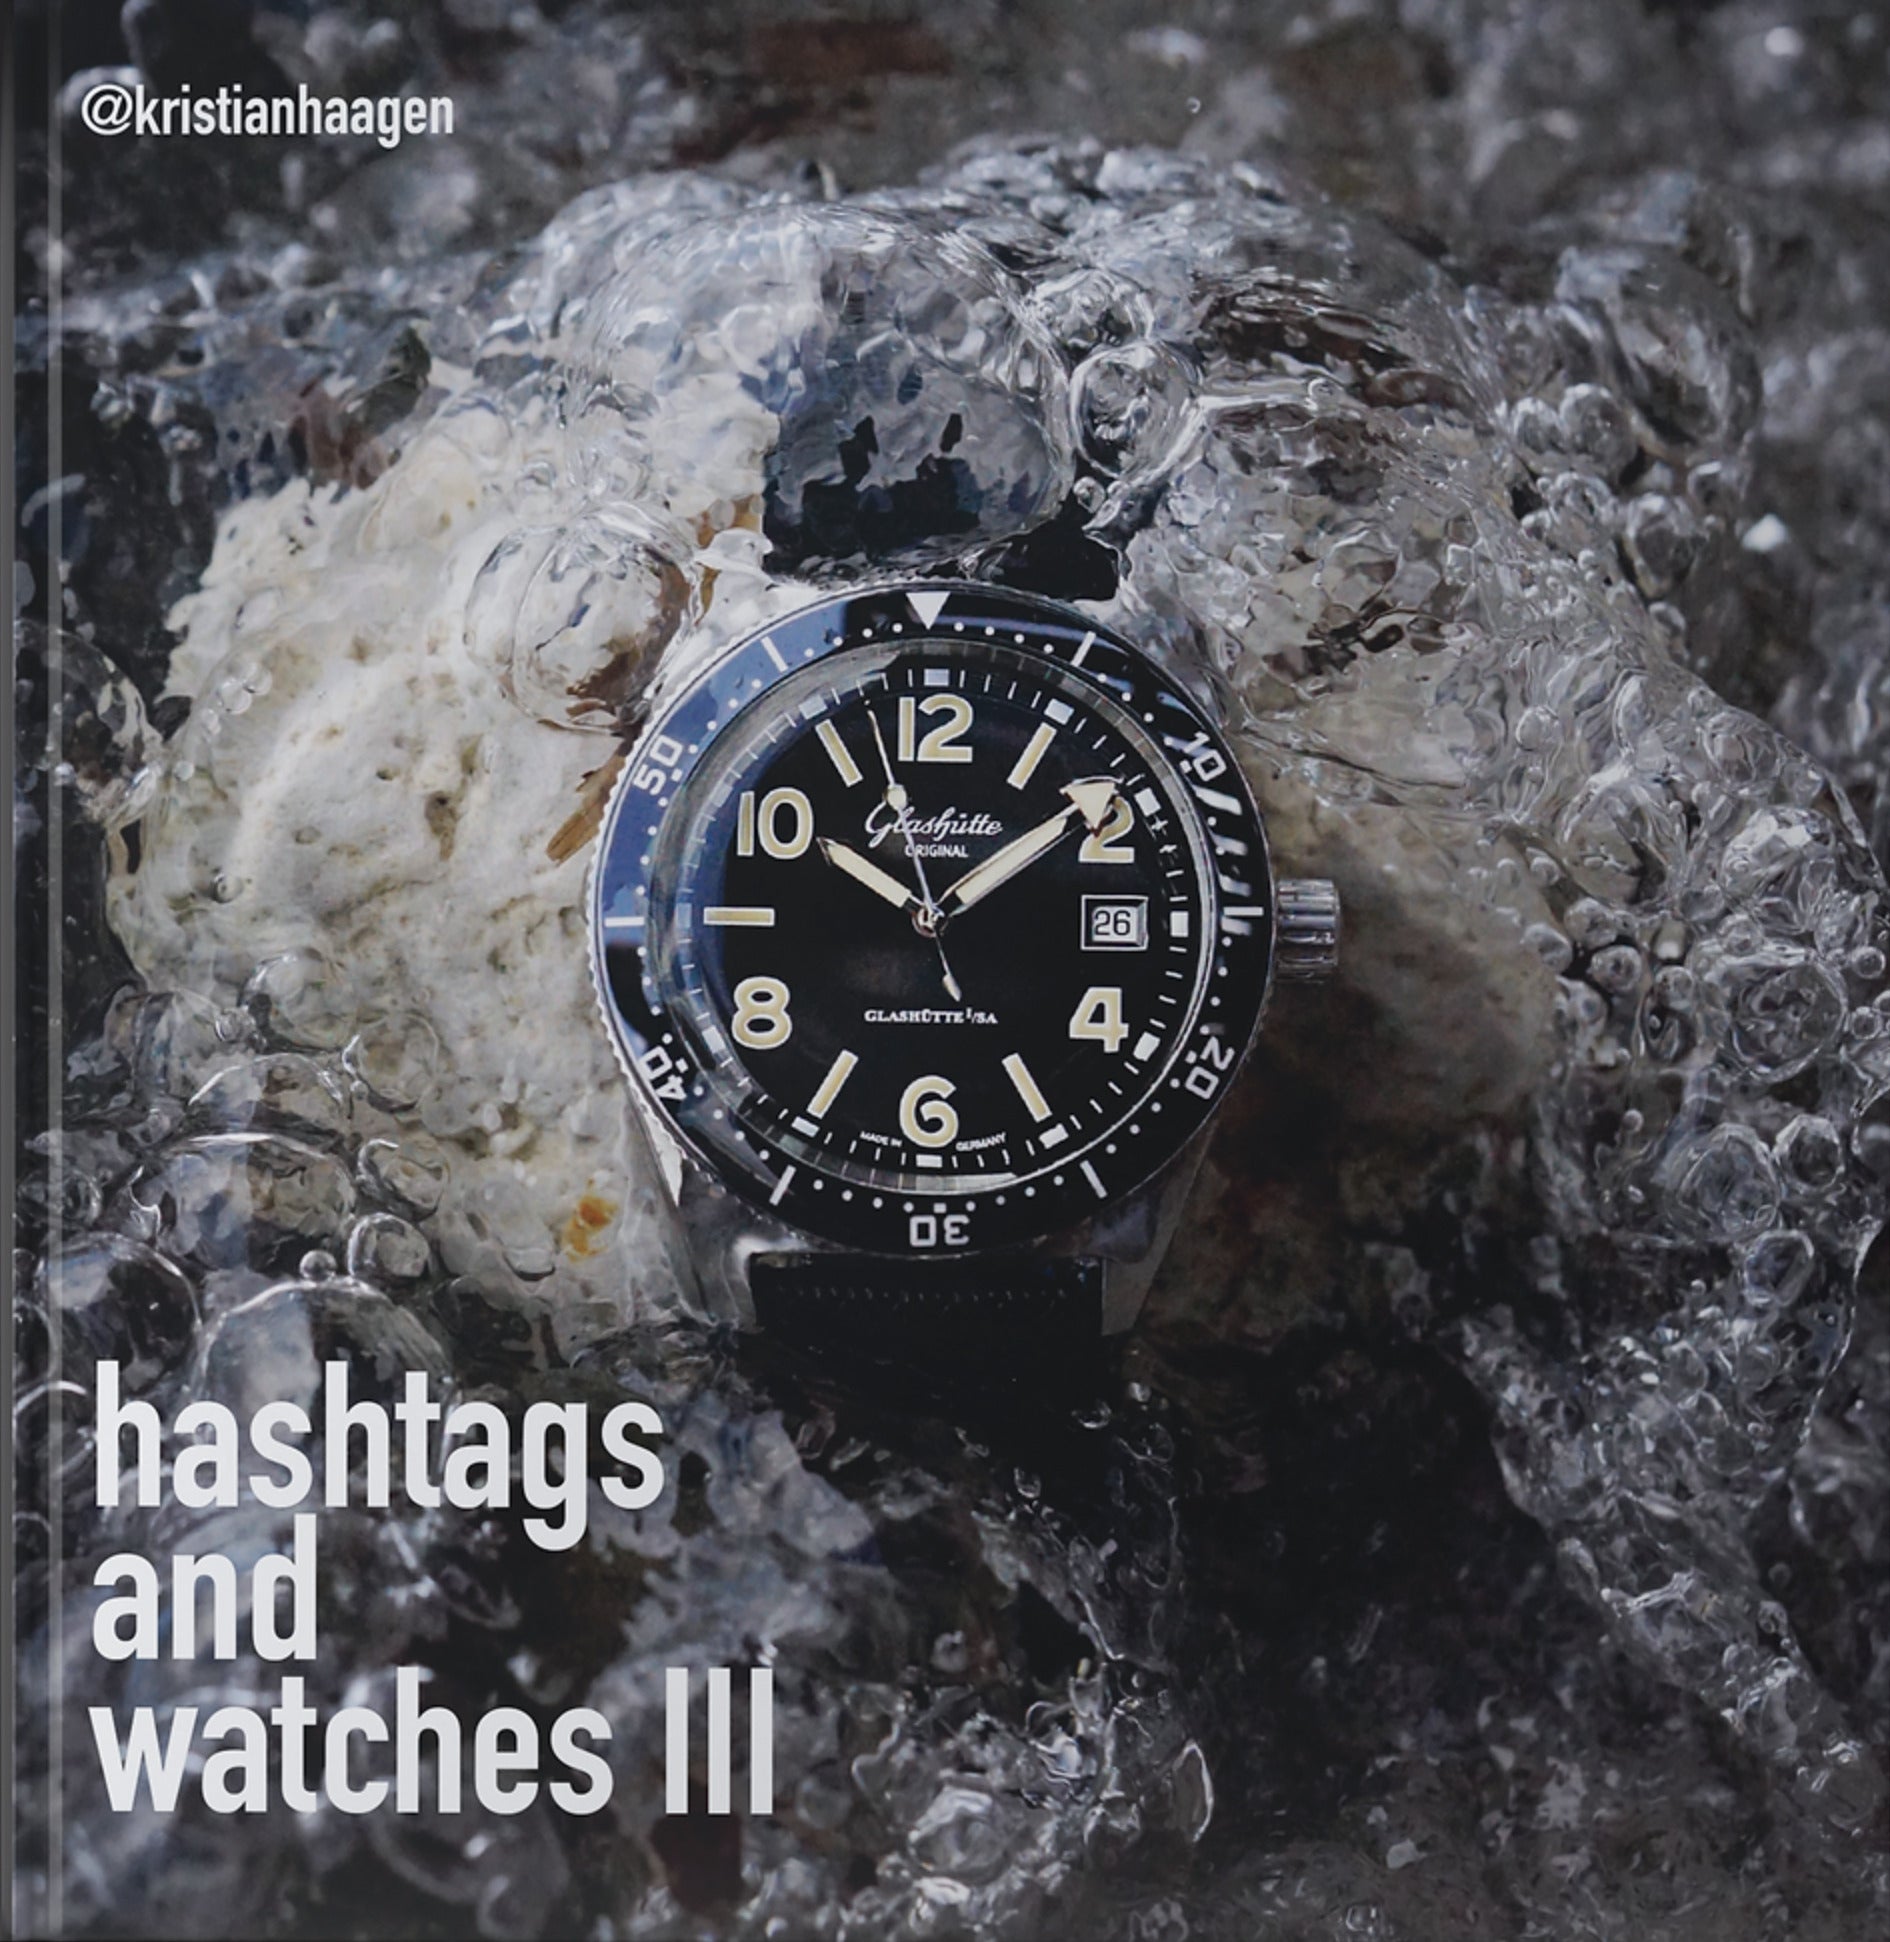 Hashtags and Watches III